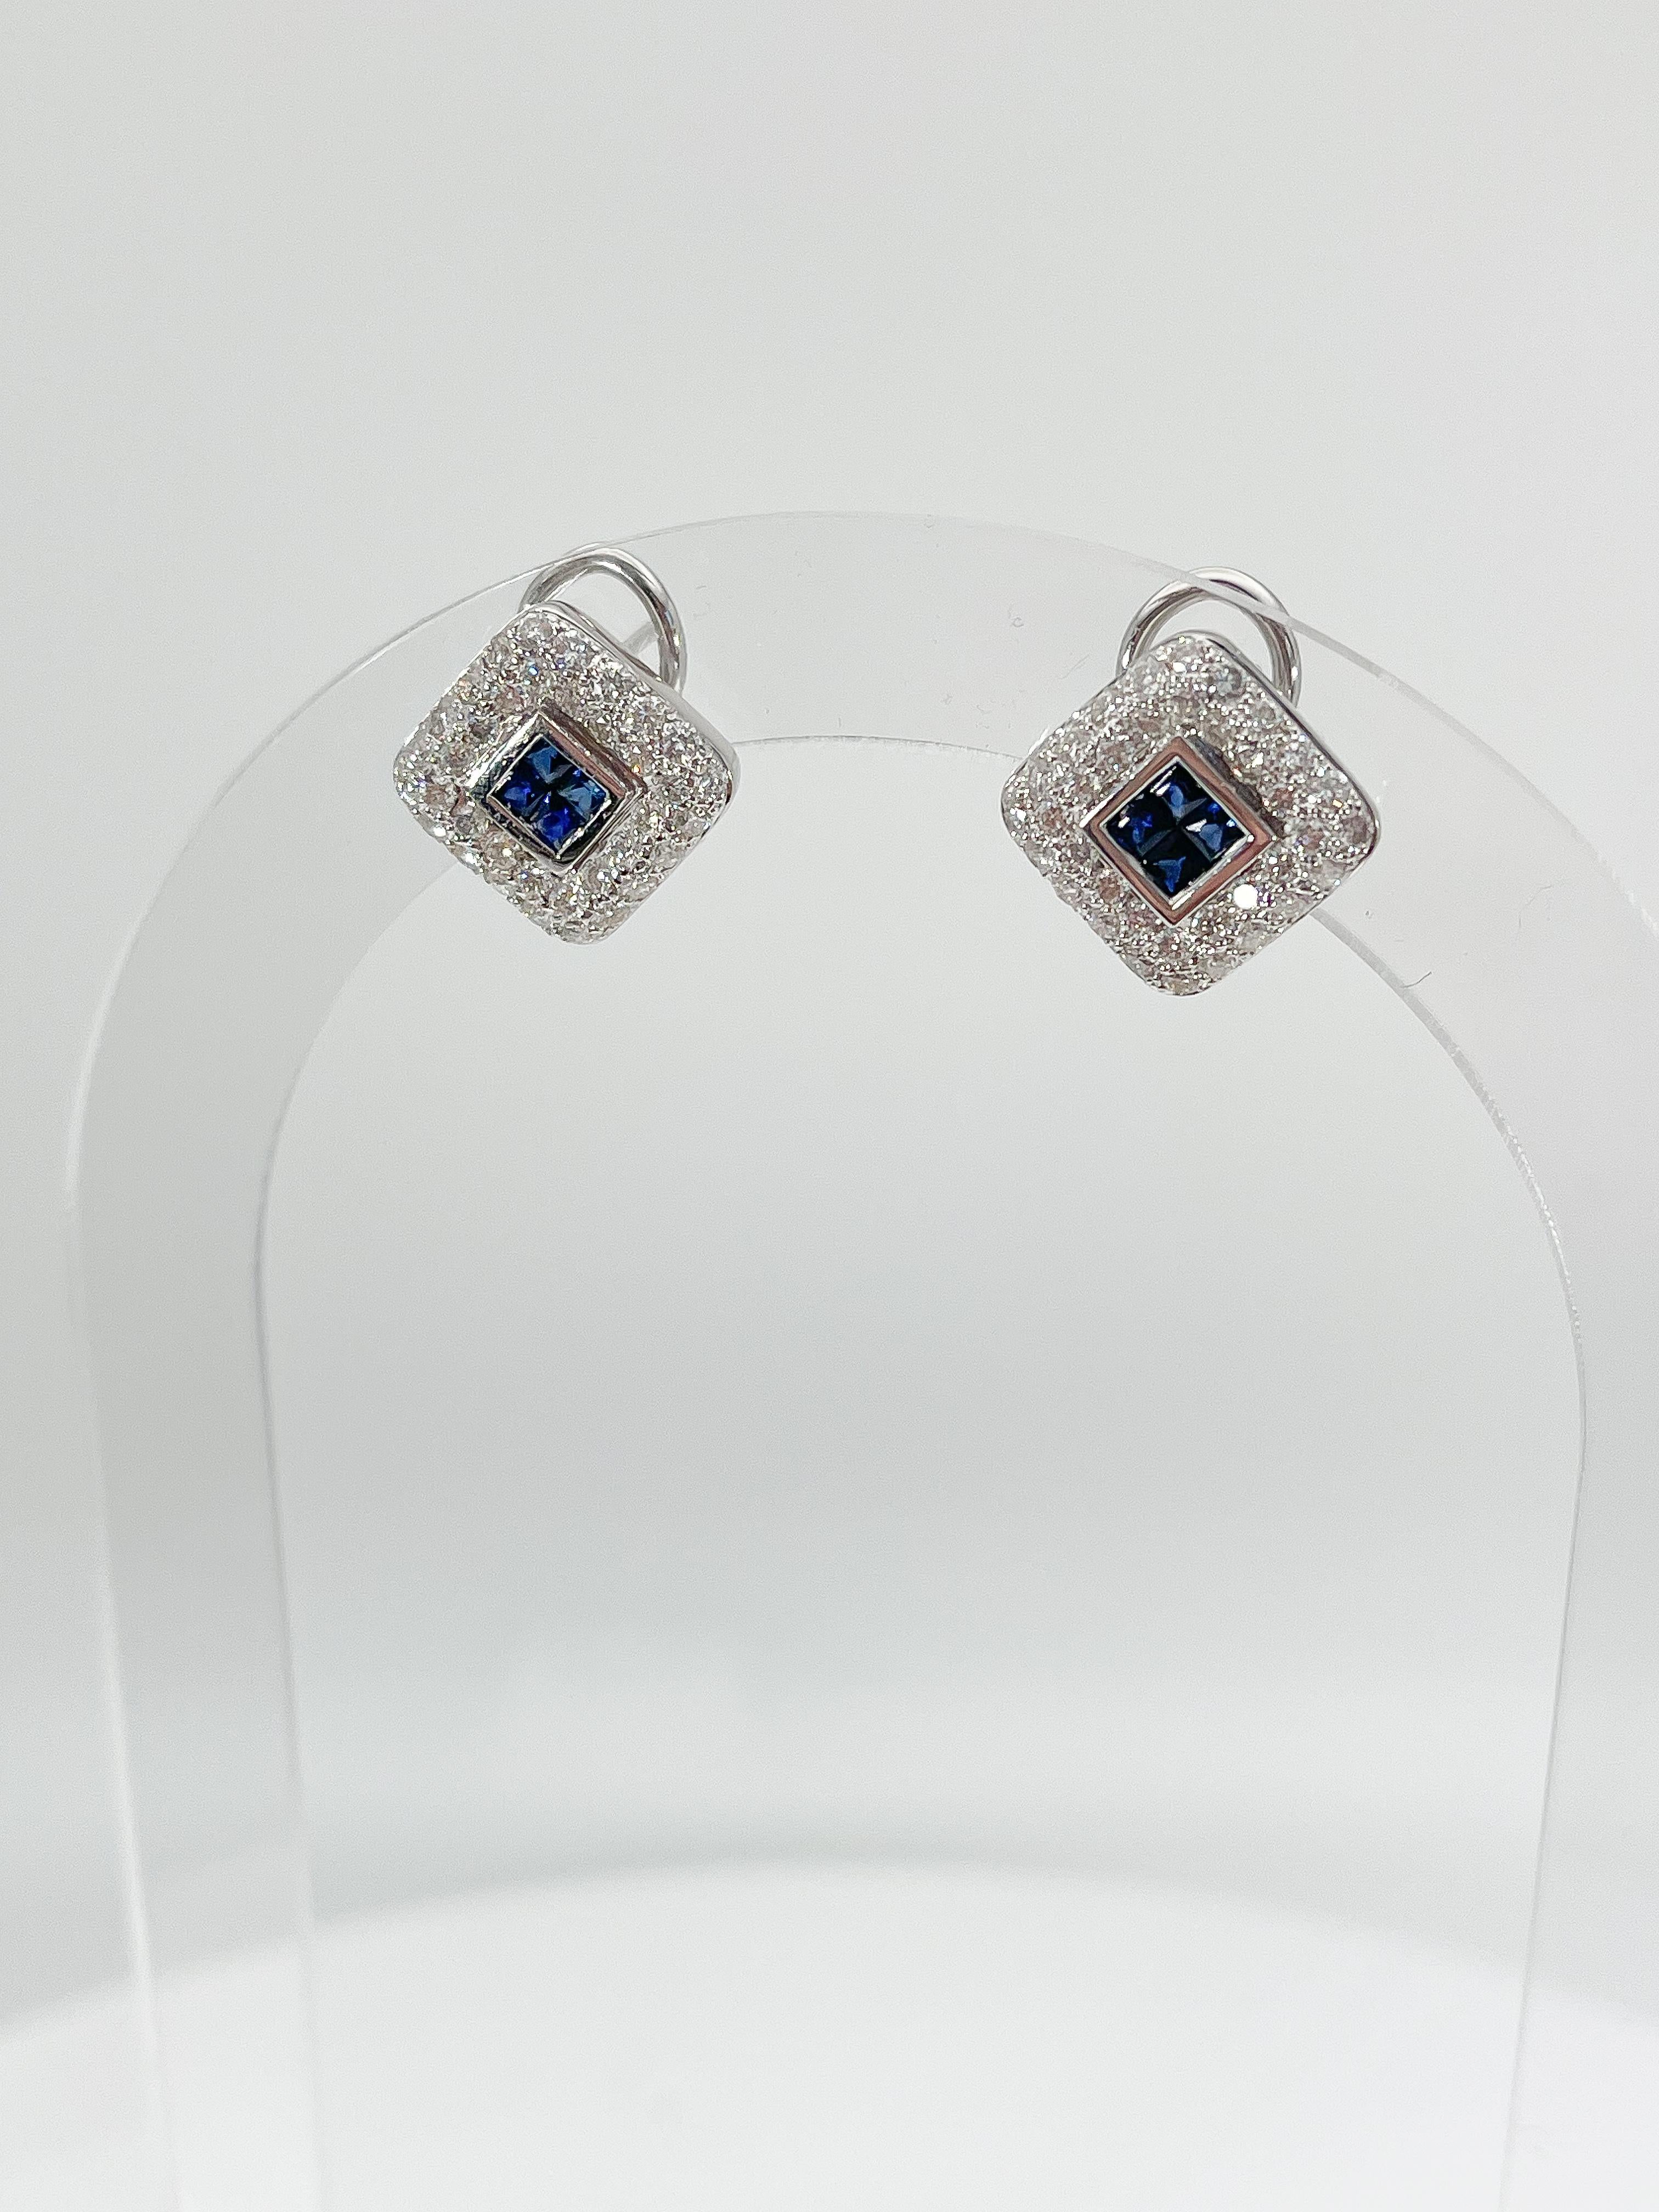 18k white gold 1 CTW sapphire and 1 CTW diamond earrings. The sapphires are princess cut, and the diamonds are all round, they measure to be 15.6 x 15.6 mm, they have a lever back to open and close, and a total weight of 7.4 grams.